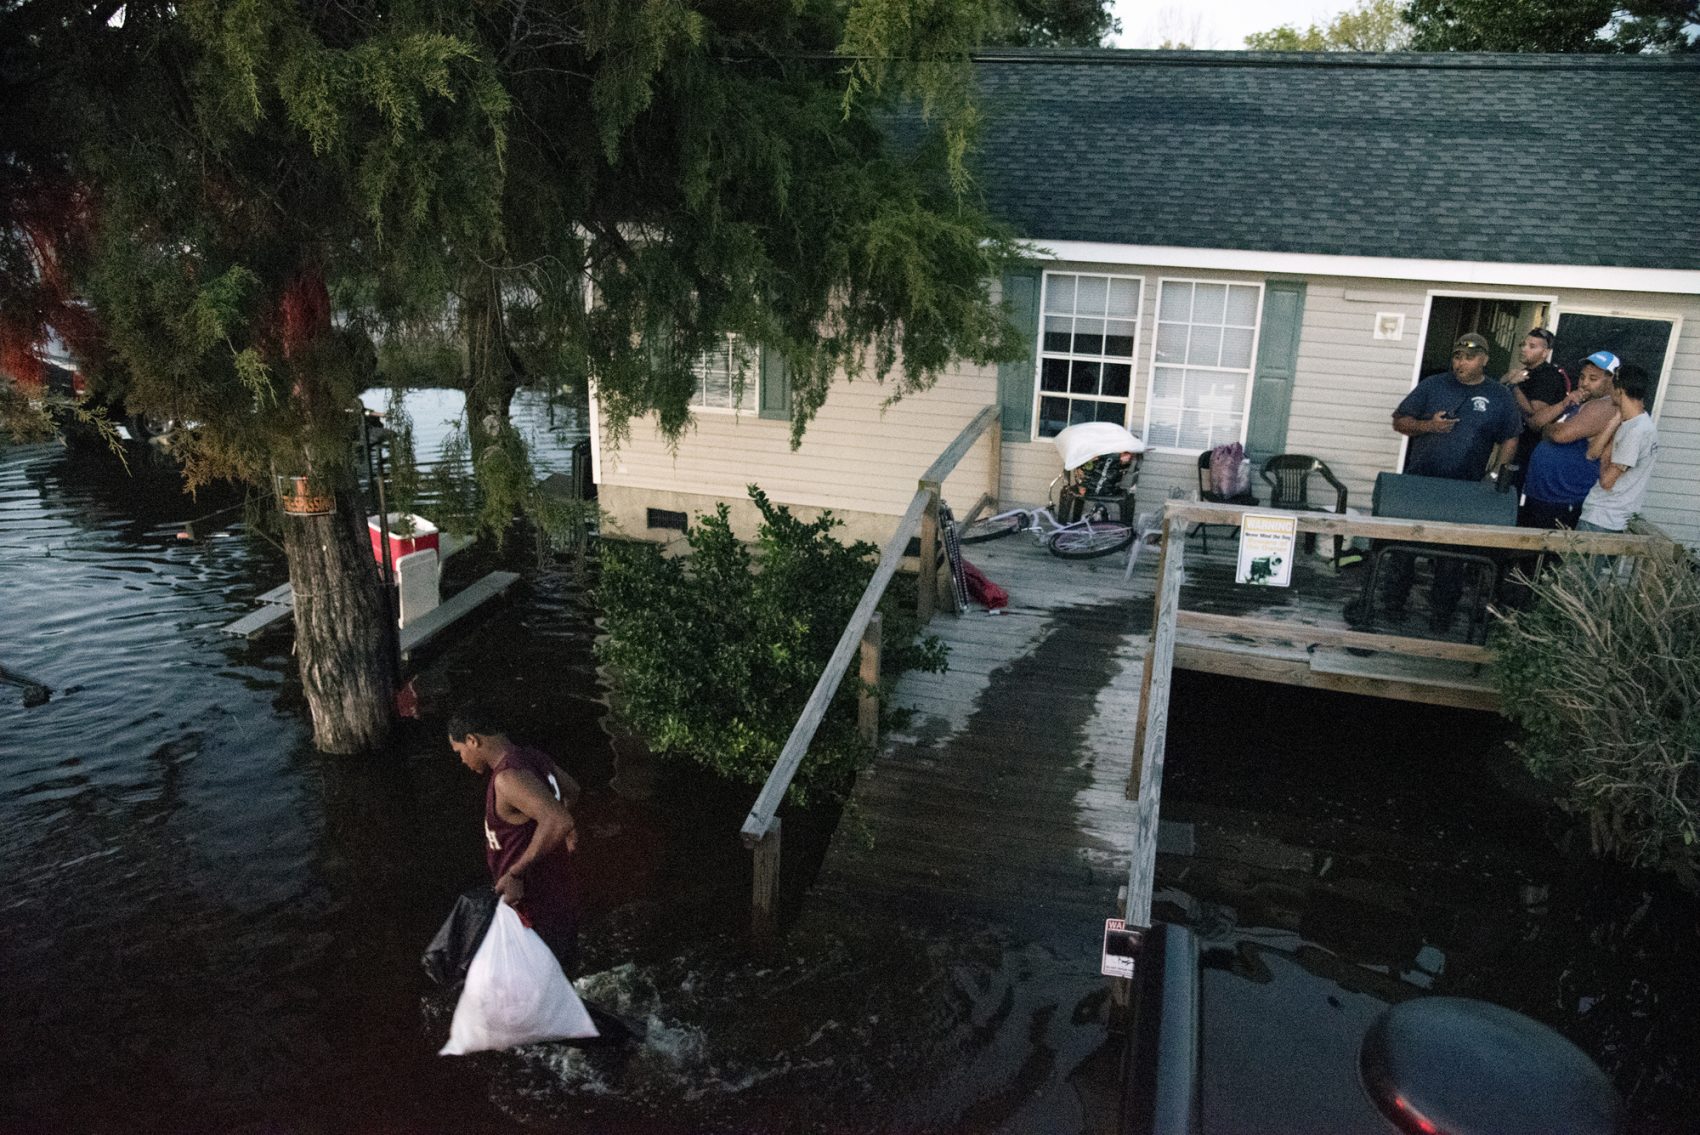 A man moves his belongings from his home that is surrounded by floodwaters caused by rain from Hurricane Matthew in Lumberton, N.C., Monday, Oct. 10, 2016. (Mike Spencer/AP)